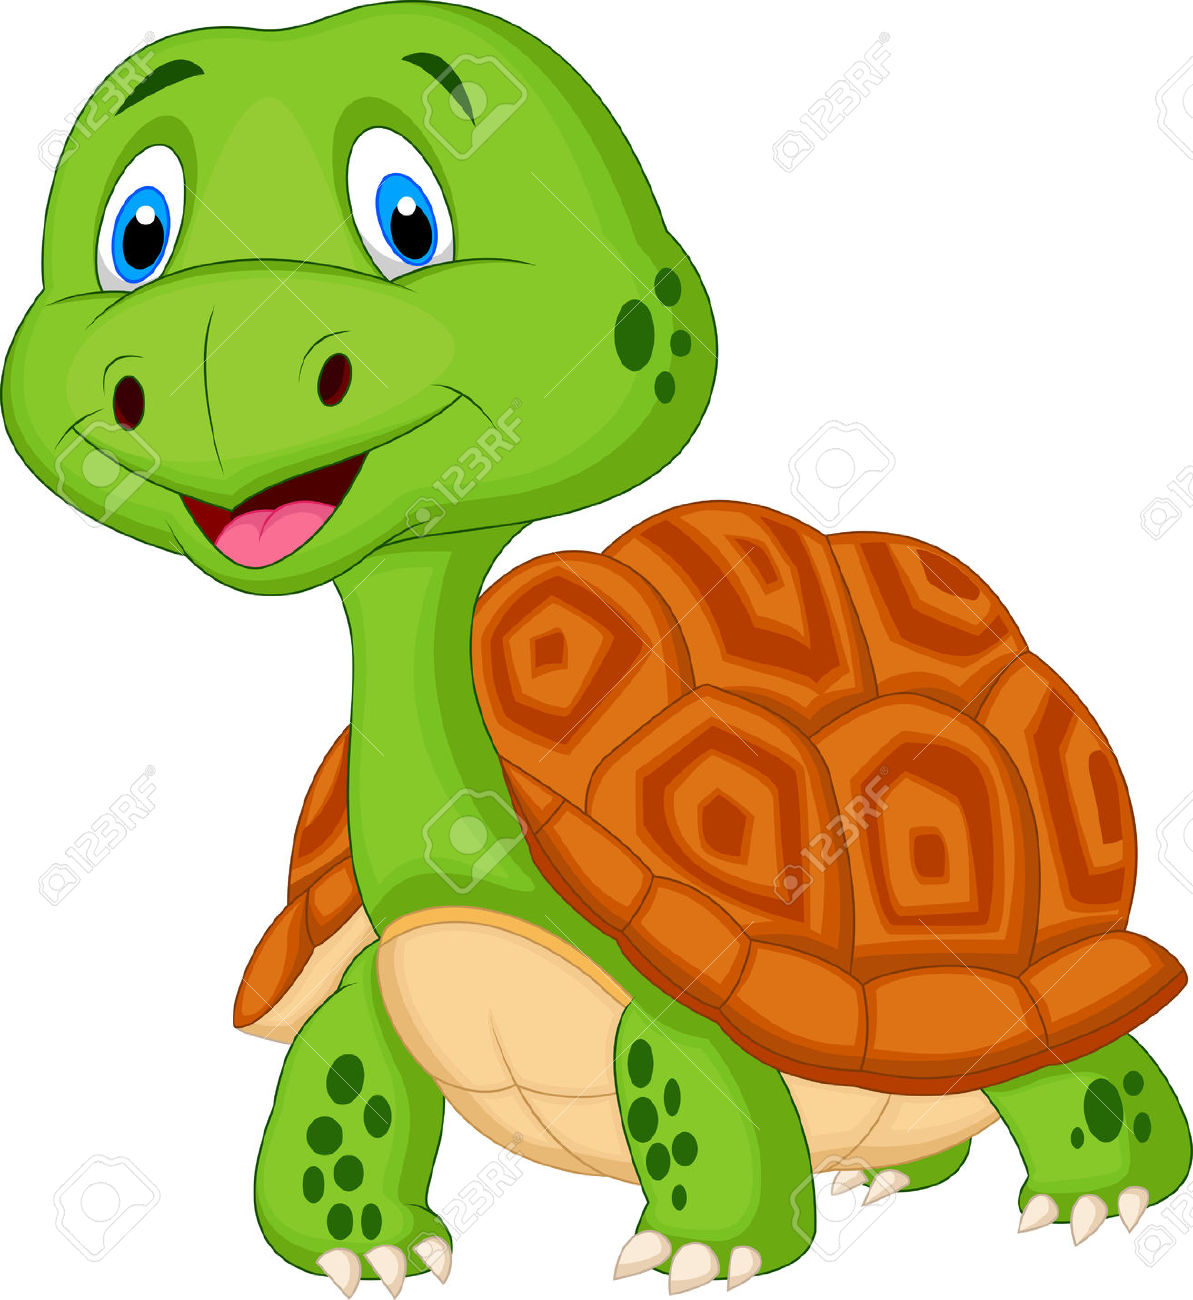 Tortoise clipart #9, Download drawings